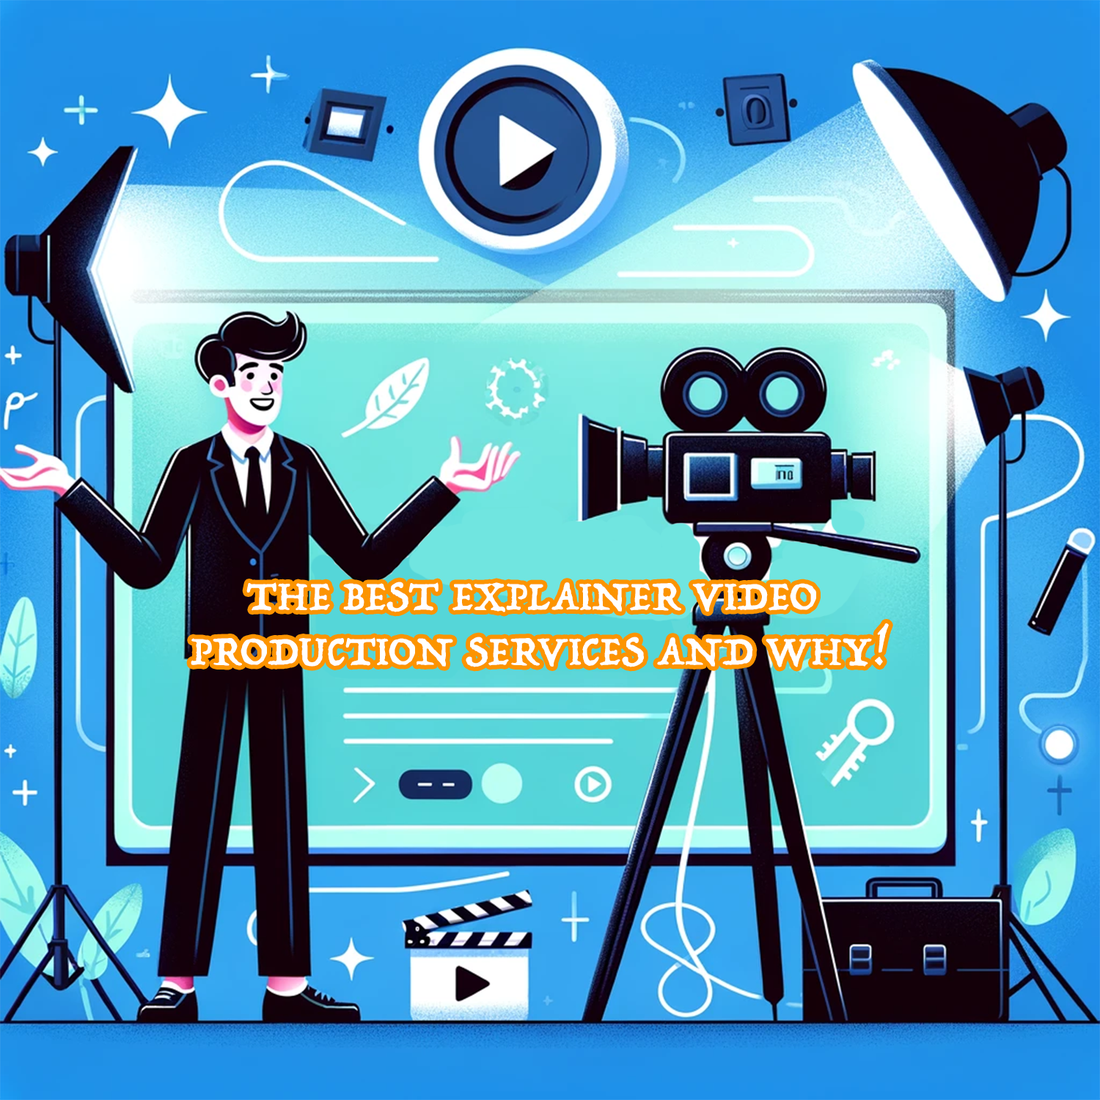 How To Choose The Best Explainer Video Company